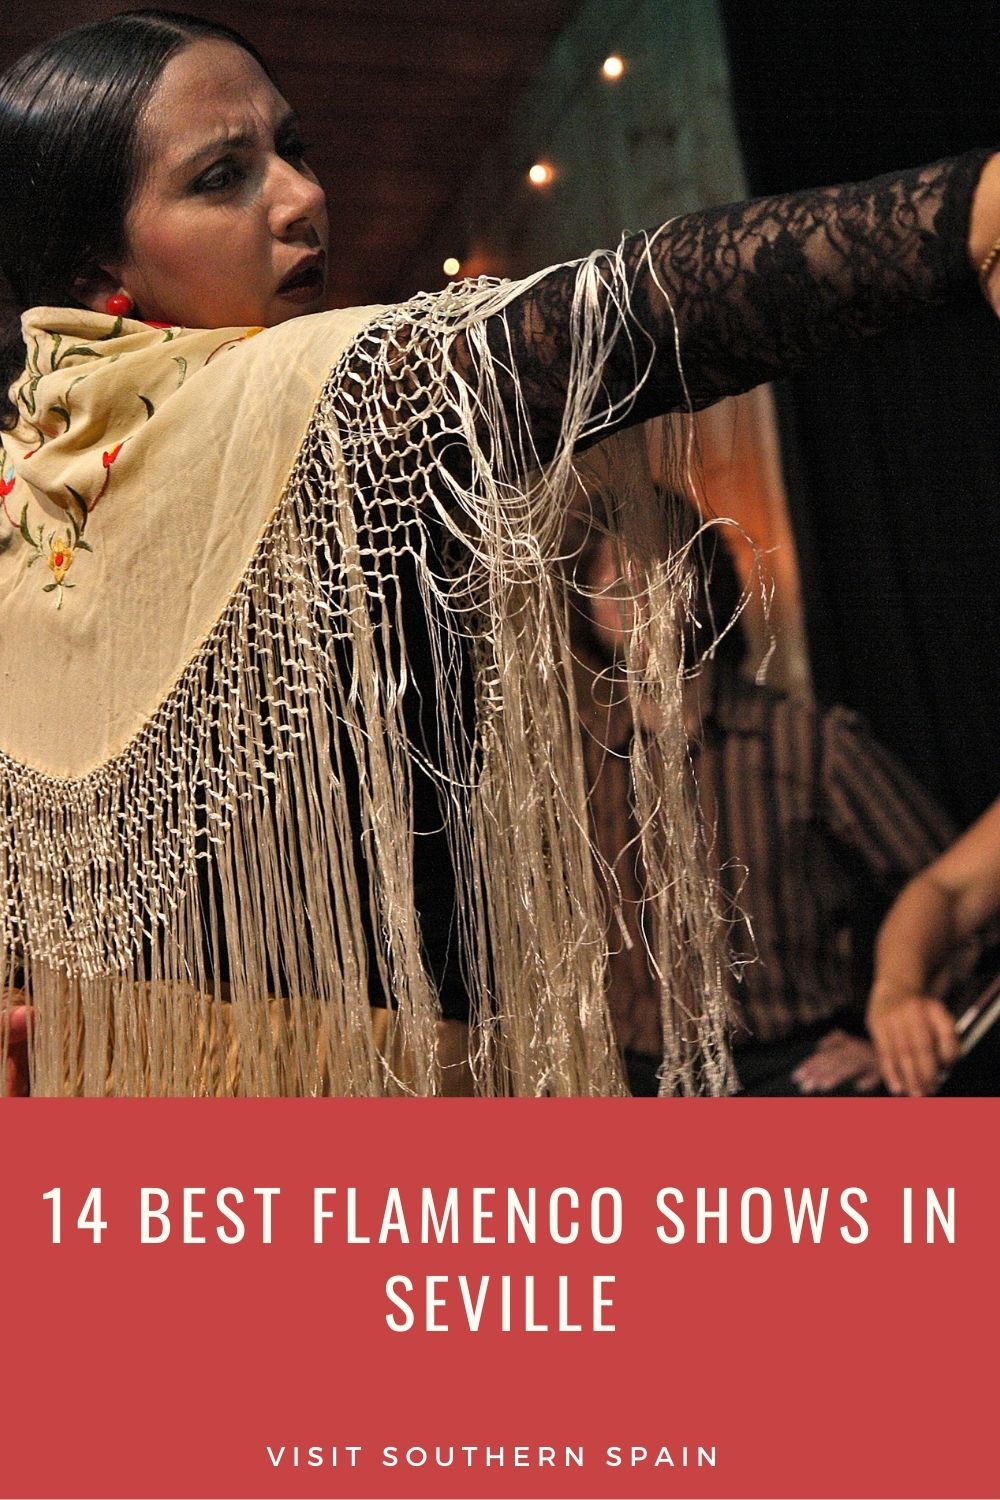 Do you want to see the best Flamenco shows in Seville, Spain? Flamenco dancing is something you need to see at least once in your life, and seeing it performed by real flamenco dancers is a must. In Seville, you can attend some of the best flamenco shows and you can let yourself be charmed by the passionate and highly-expressive flamenco dancers. Without further ado, here are the 14 Best Flamenco shows in Seville right now. #bestflamencoshows #flamencoinseville #flamenco #sevillle #flamencodance